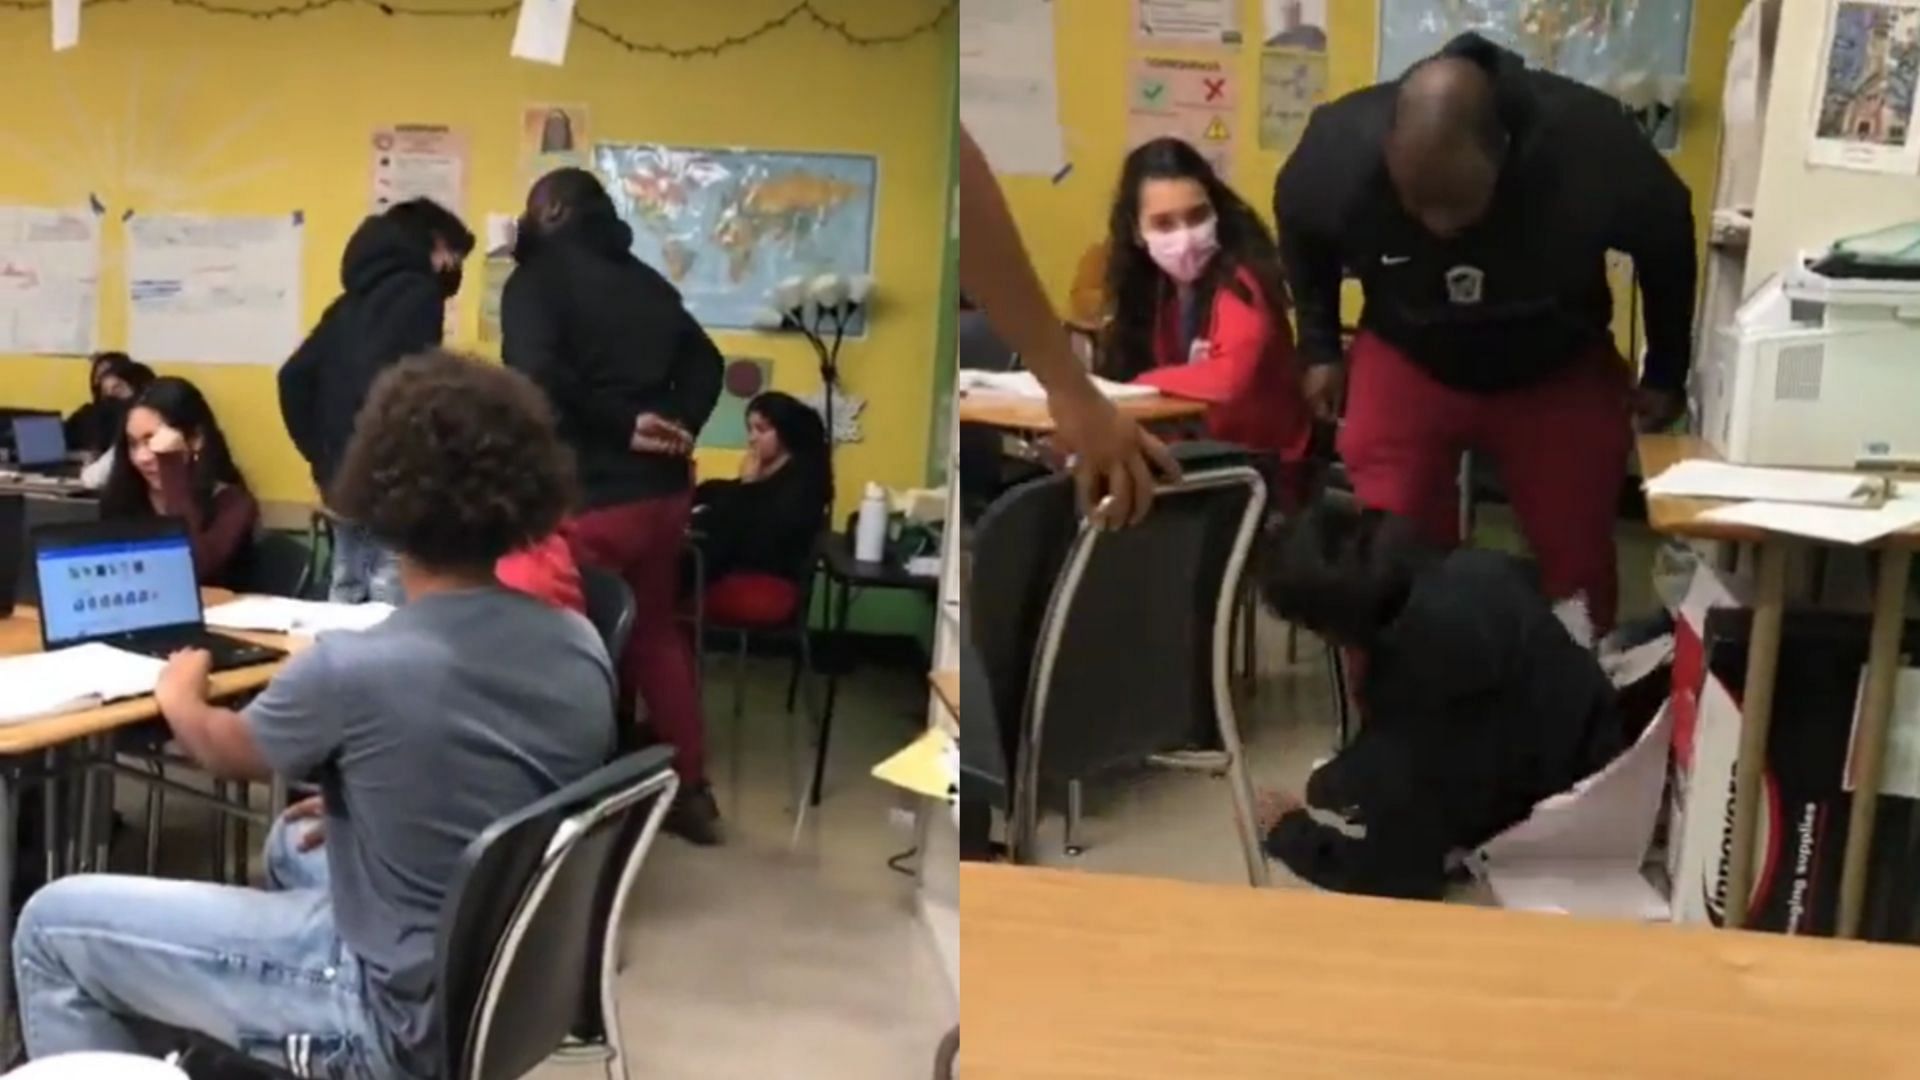 “Teachers need to be the enforcers”: Richmond substitute teacher slams student in viral video, sparks online debate 